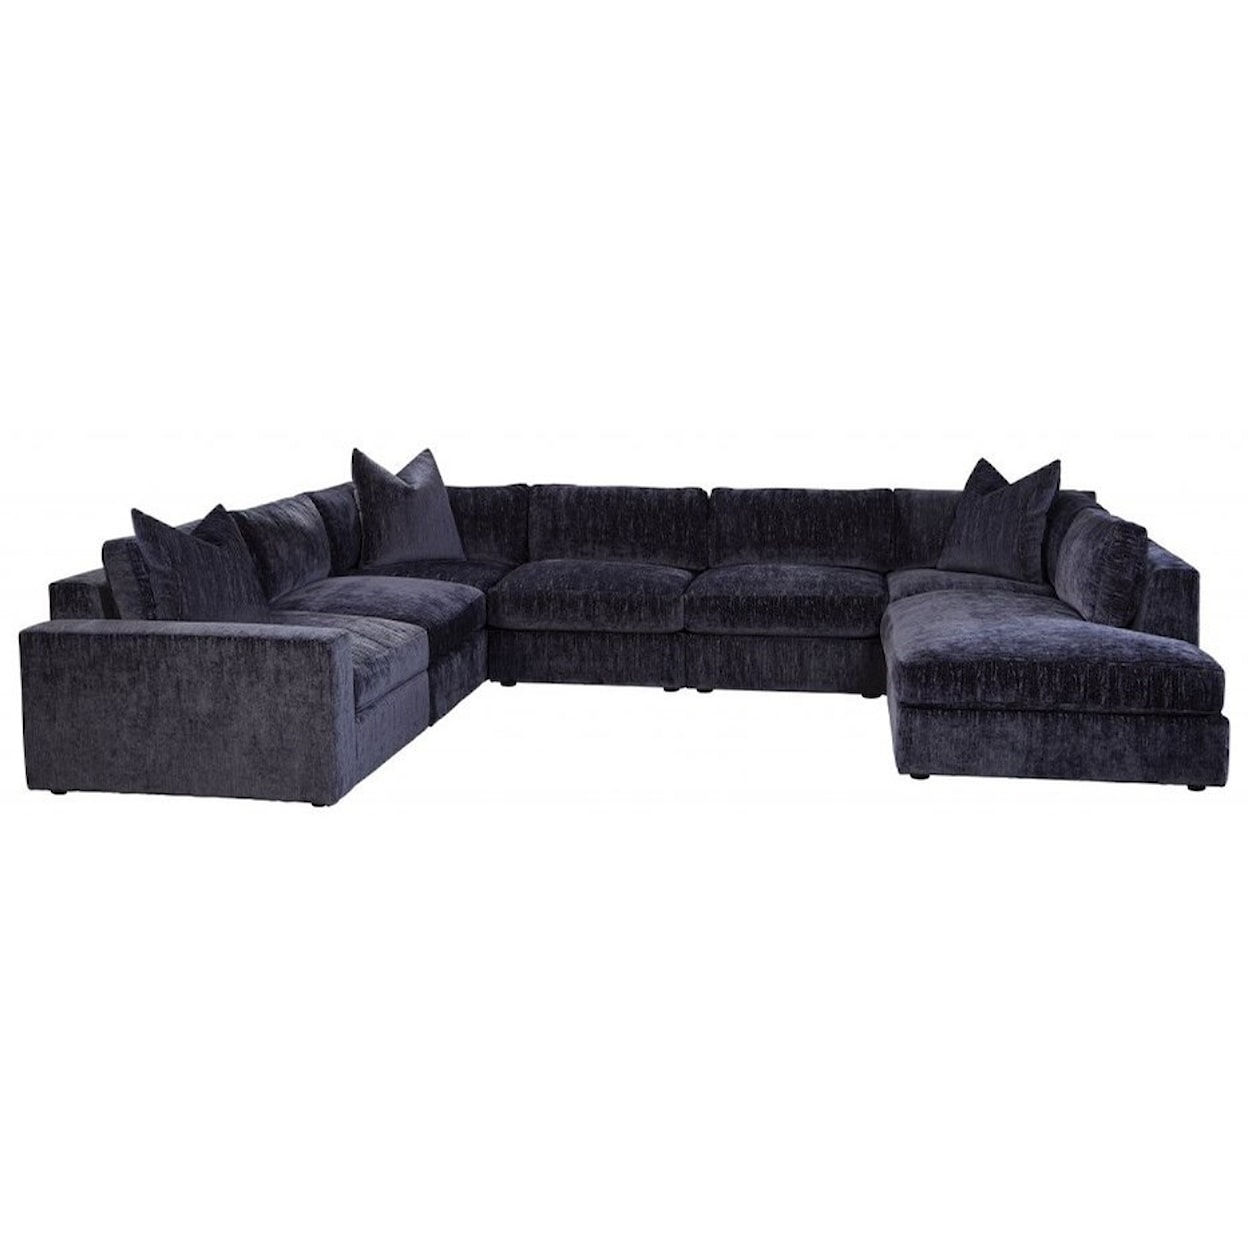 Jonathan Louis Link 7-Piece Sectional with RAF Chaise